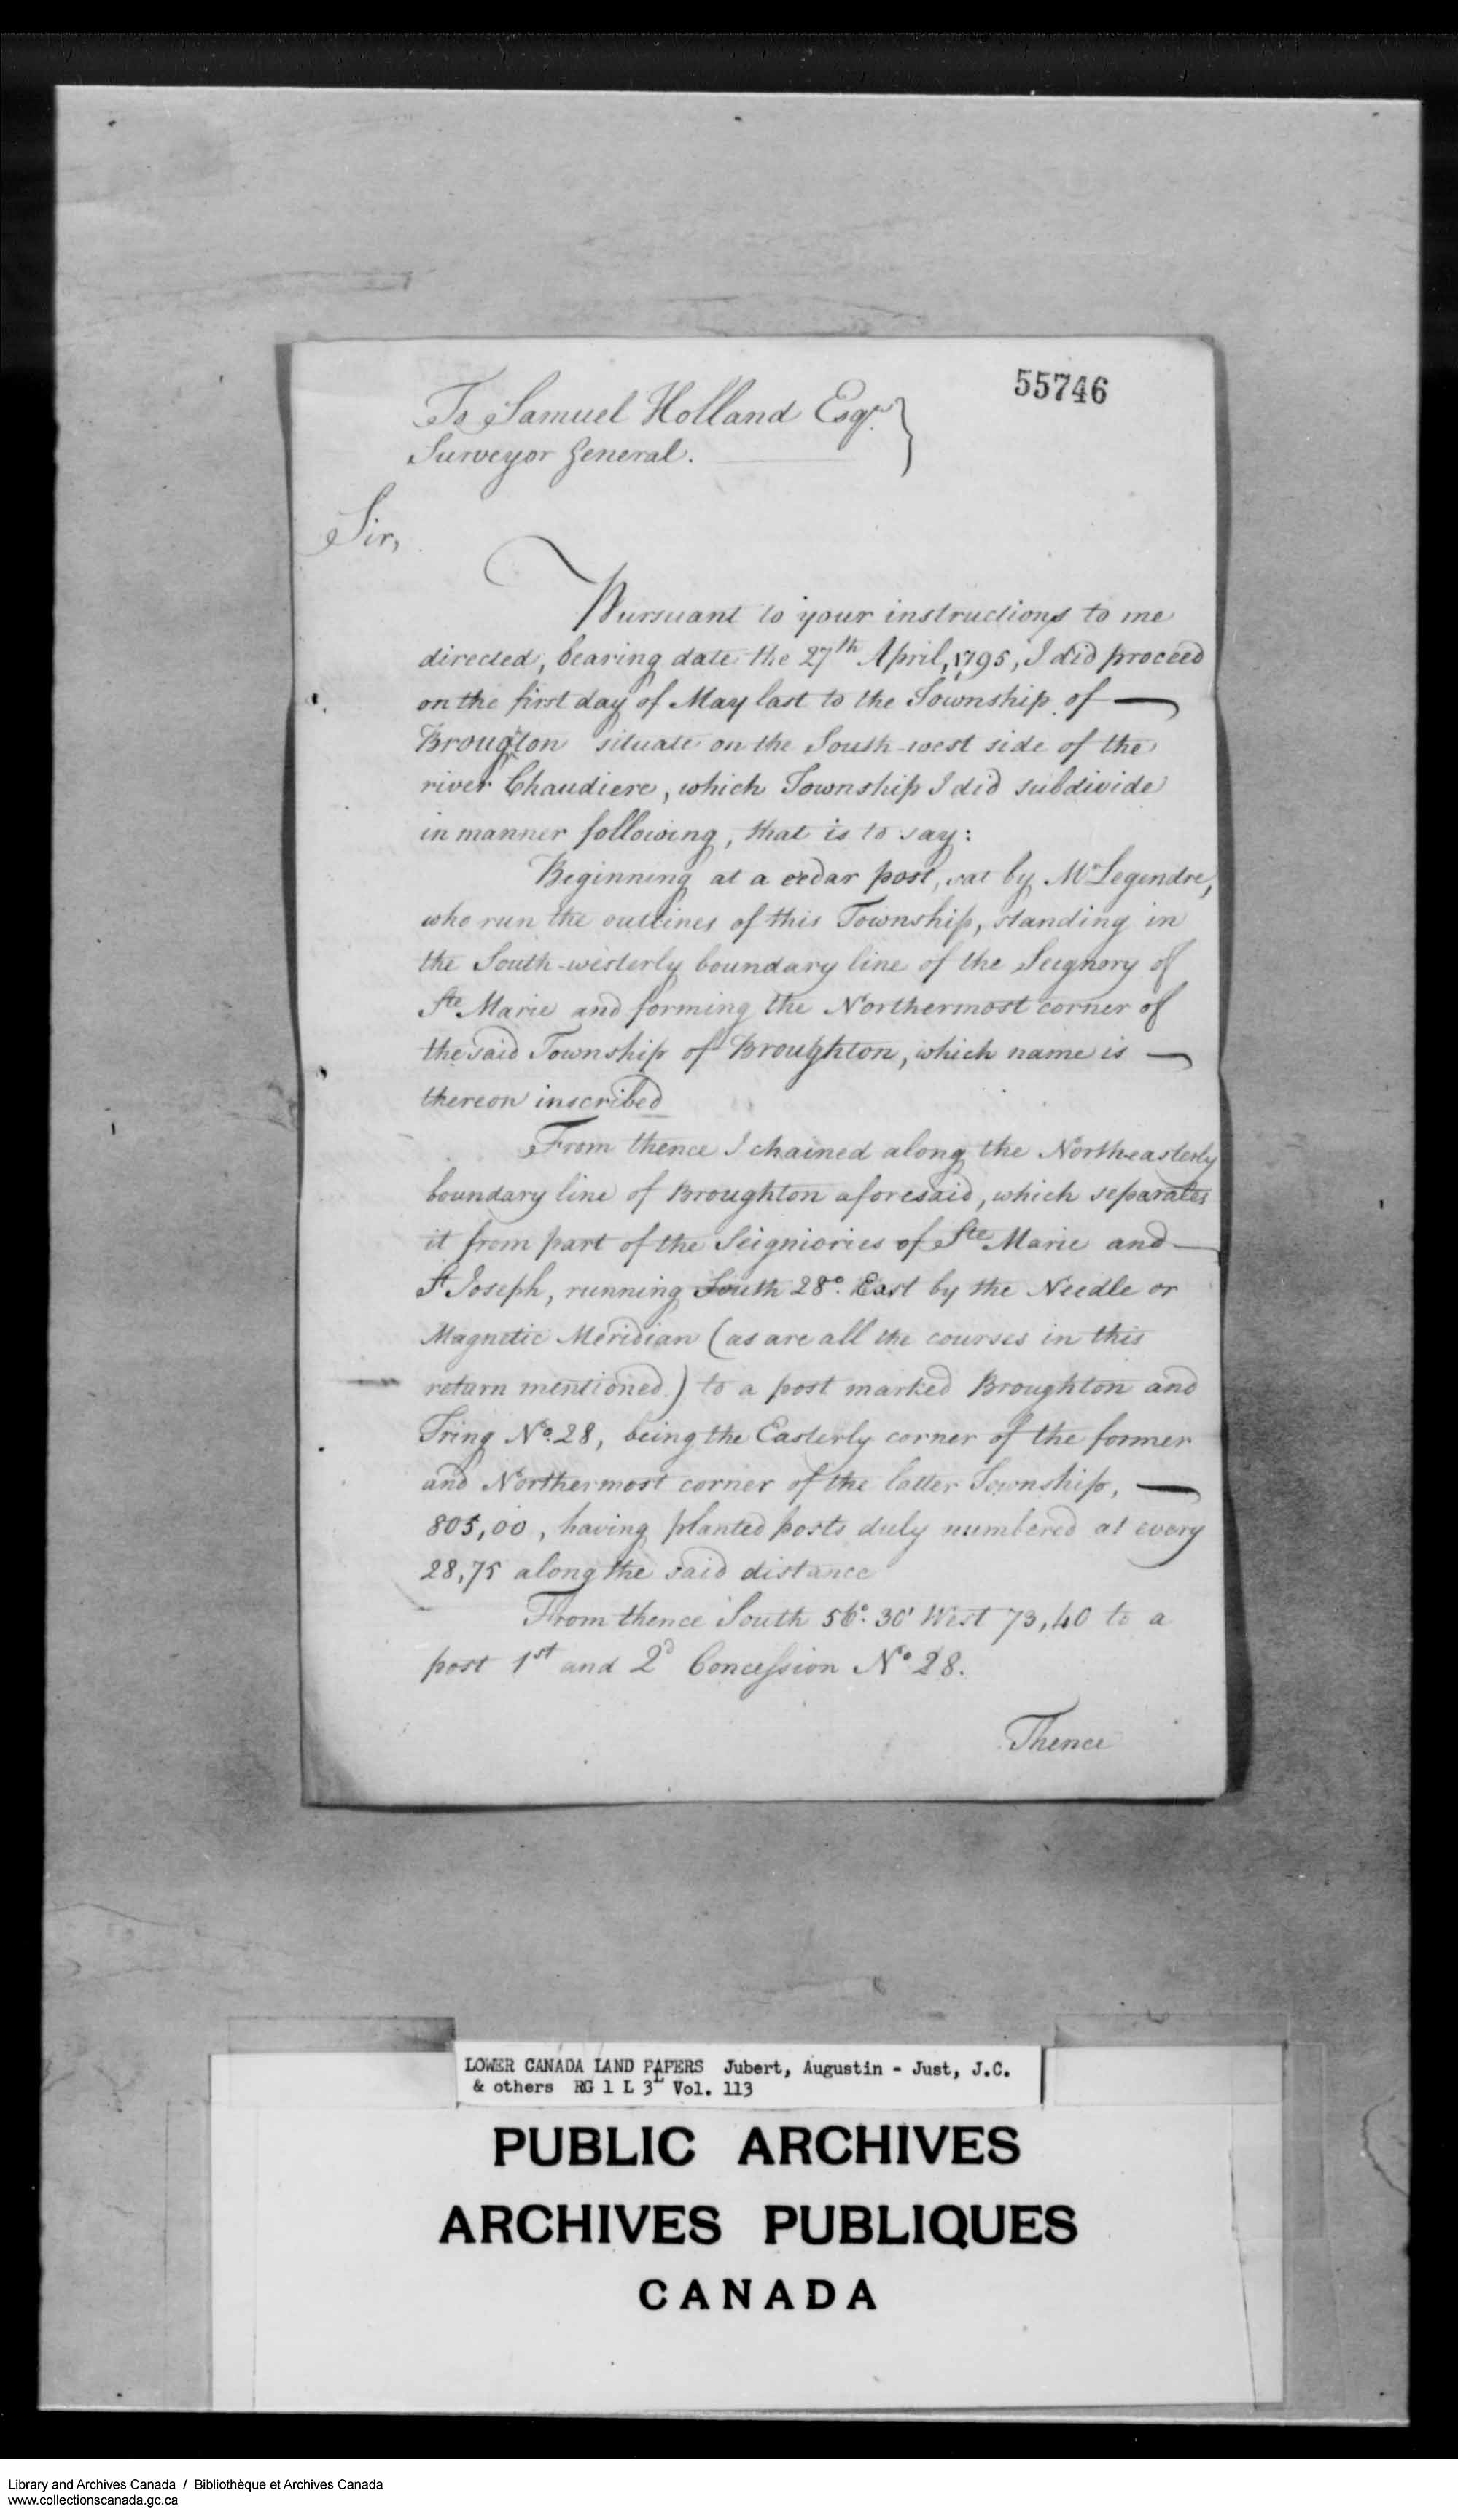 Digitized page of  for Image No.: e008700234